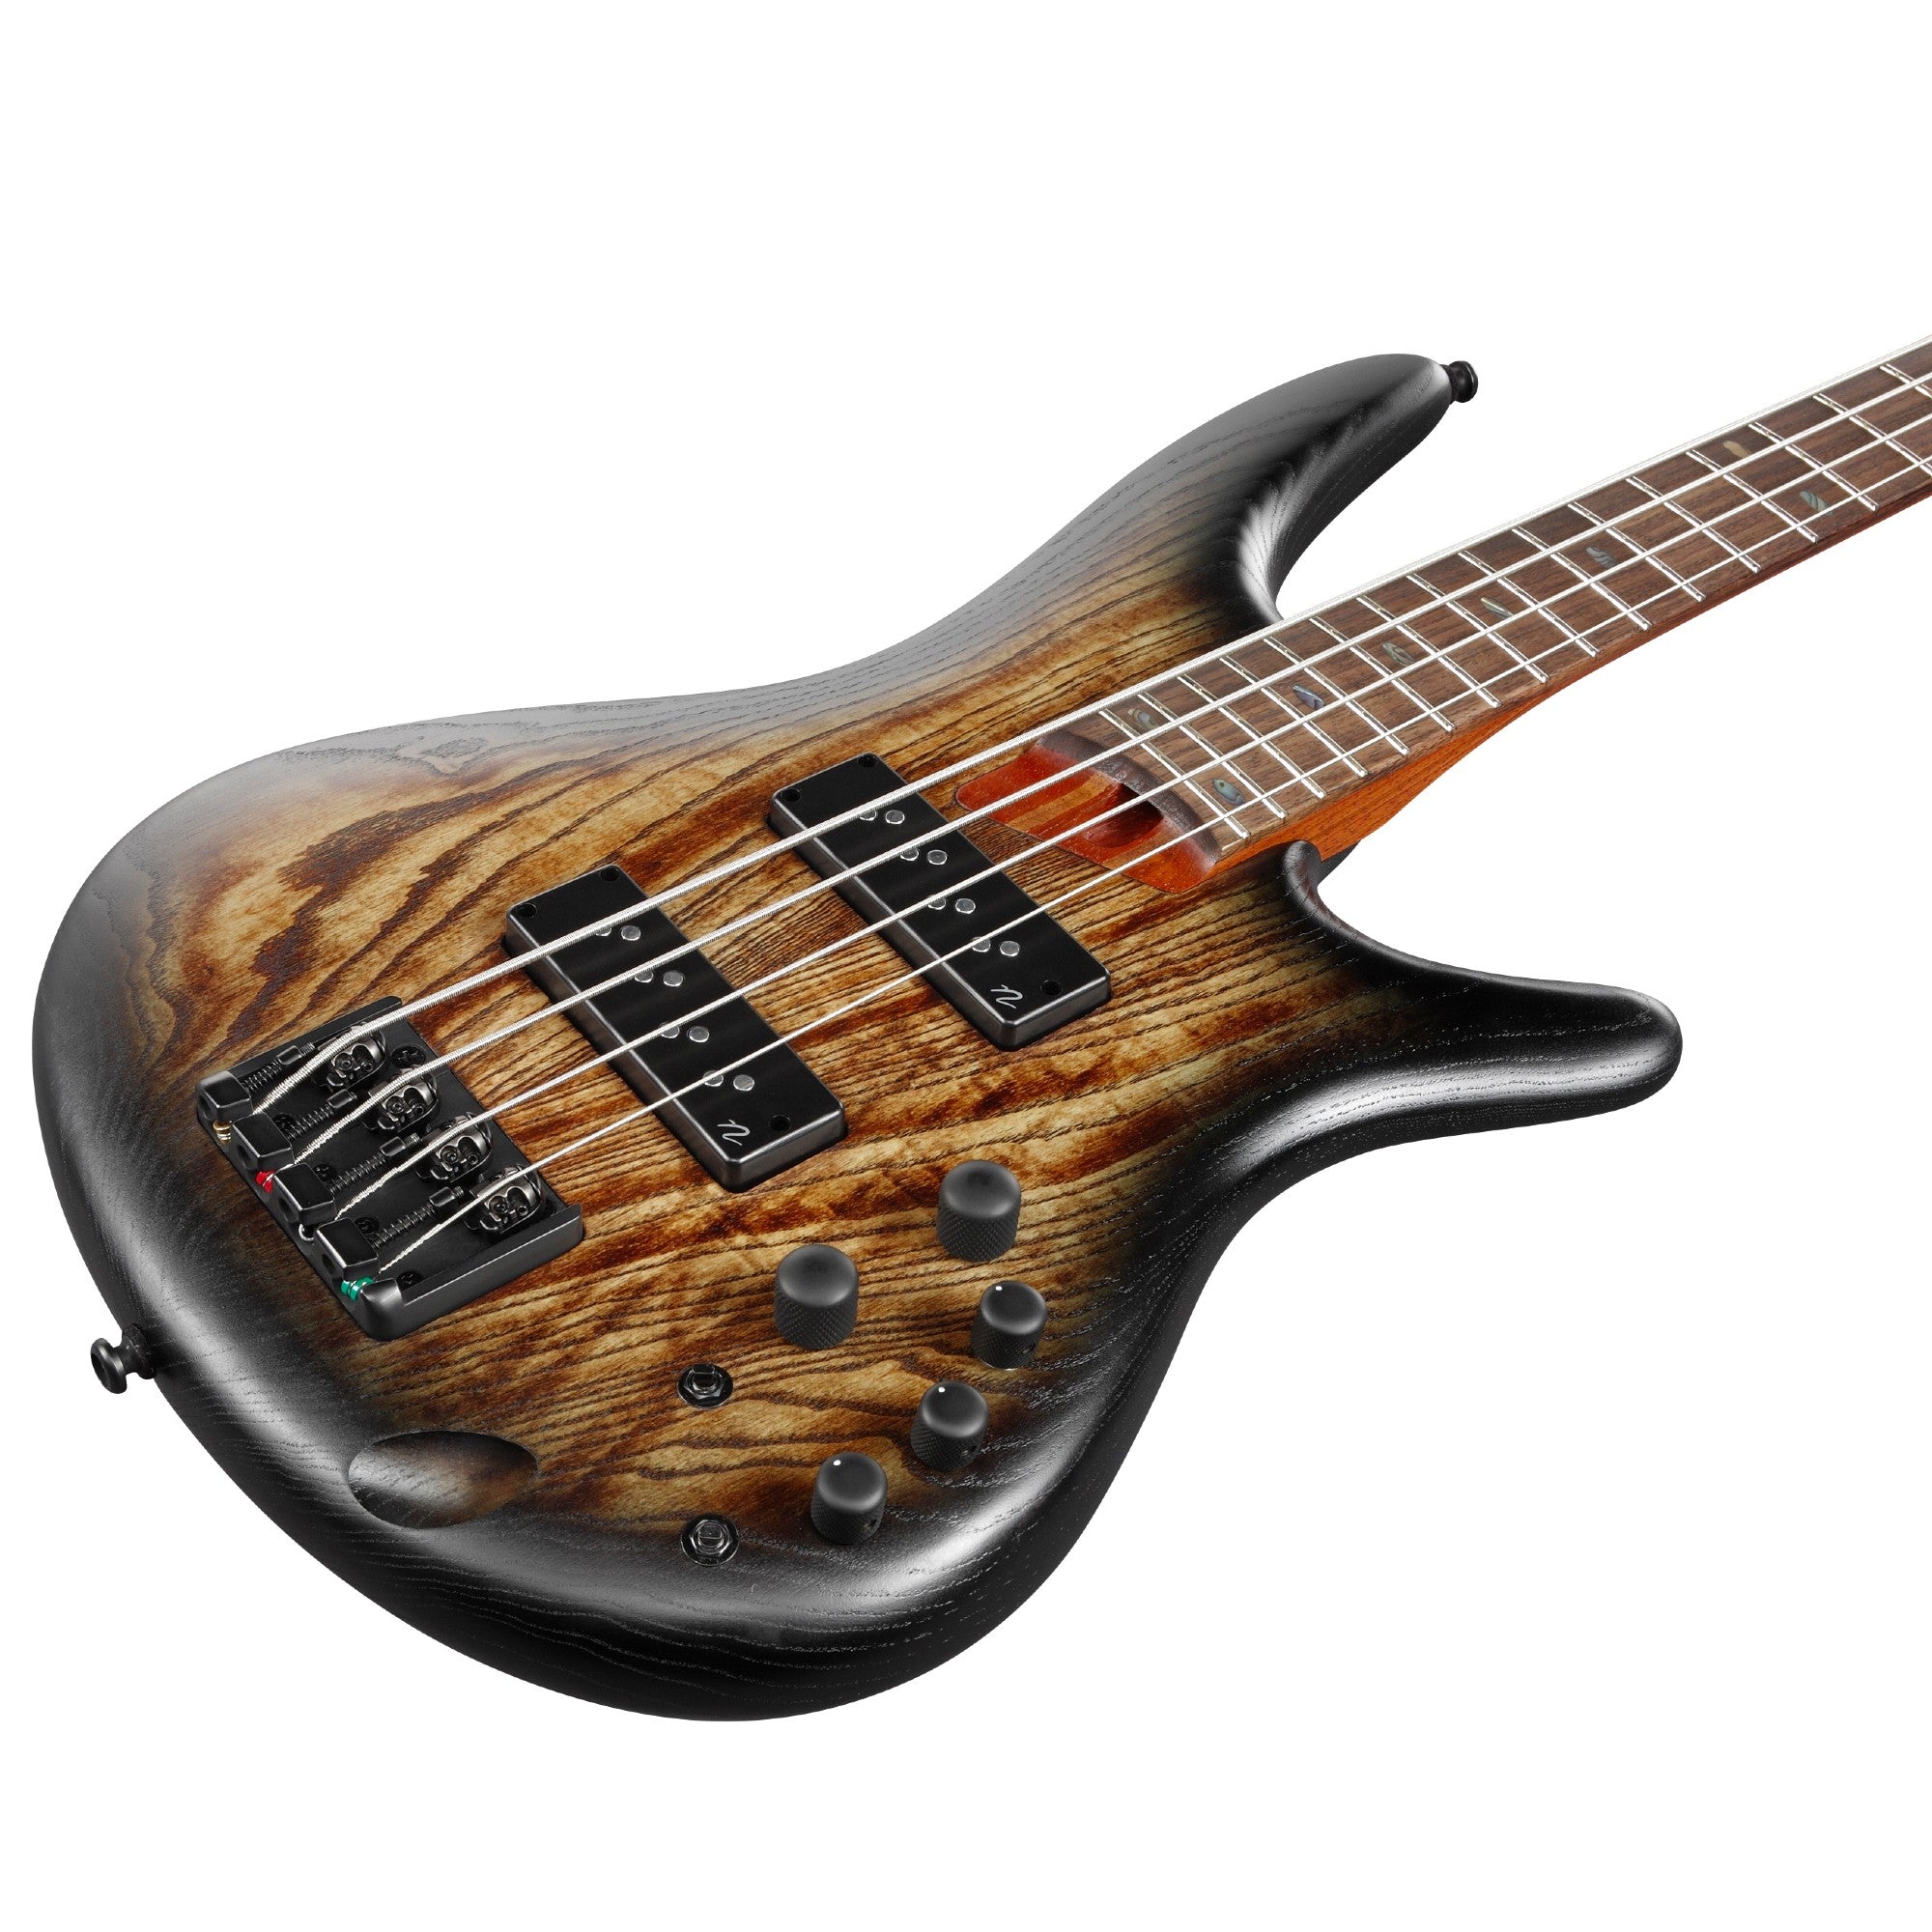 Ibanez SR600EAST 4-String Bass Guitar - Antique Brown Stained Burst Body Flat